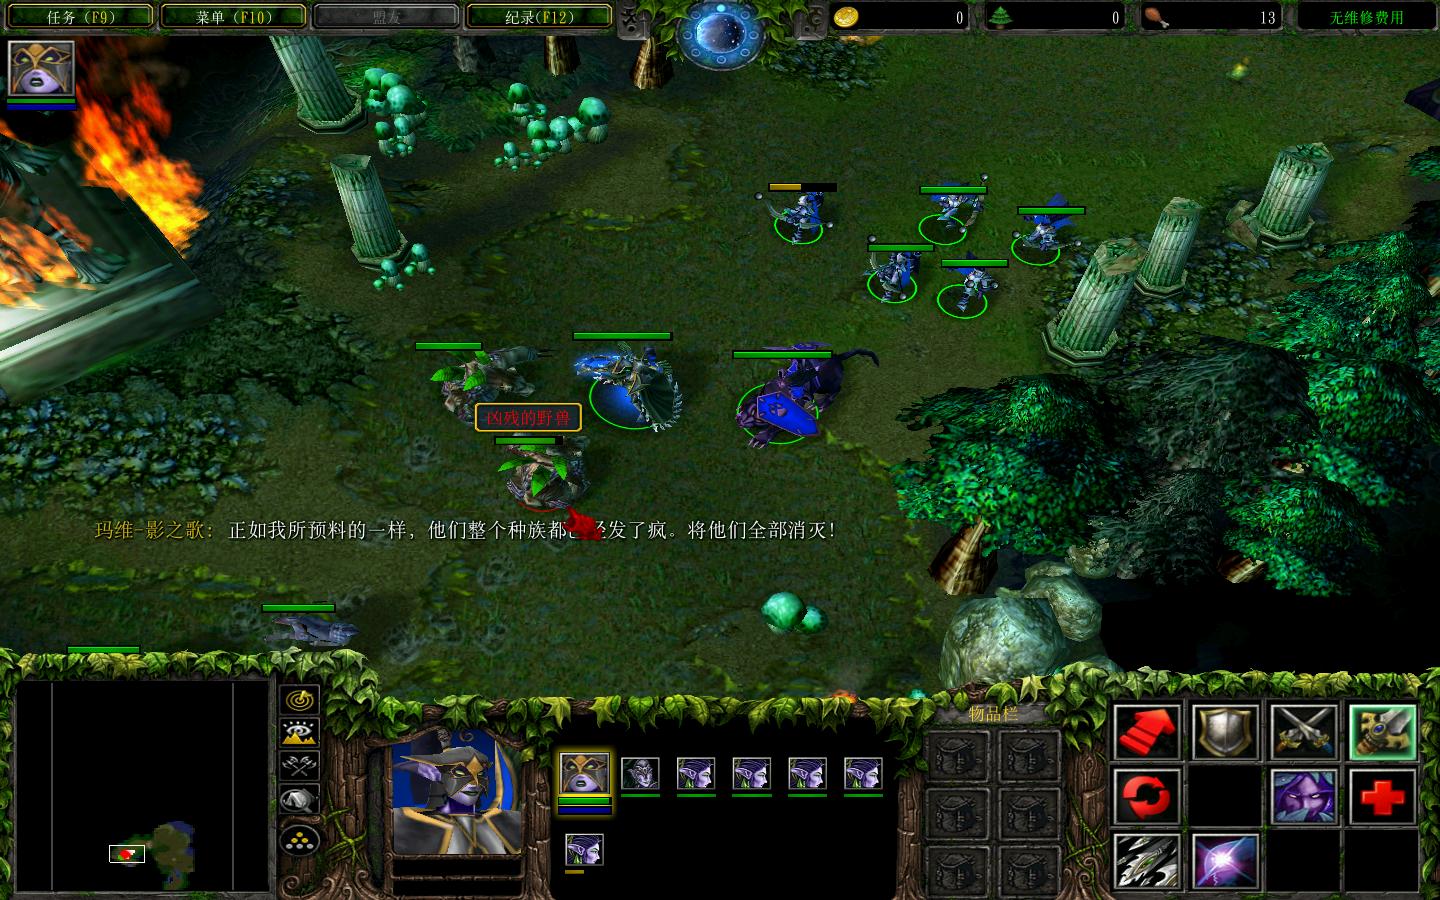 ħ3Warcraft III The Frozen Thronev1.20-1.27κ3C v5.563.2